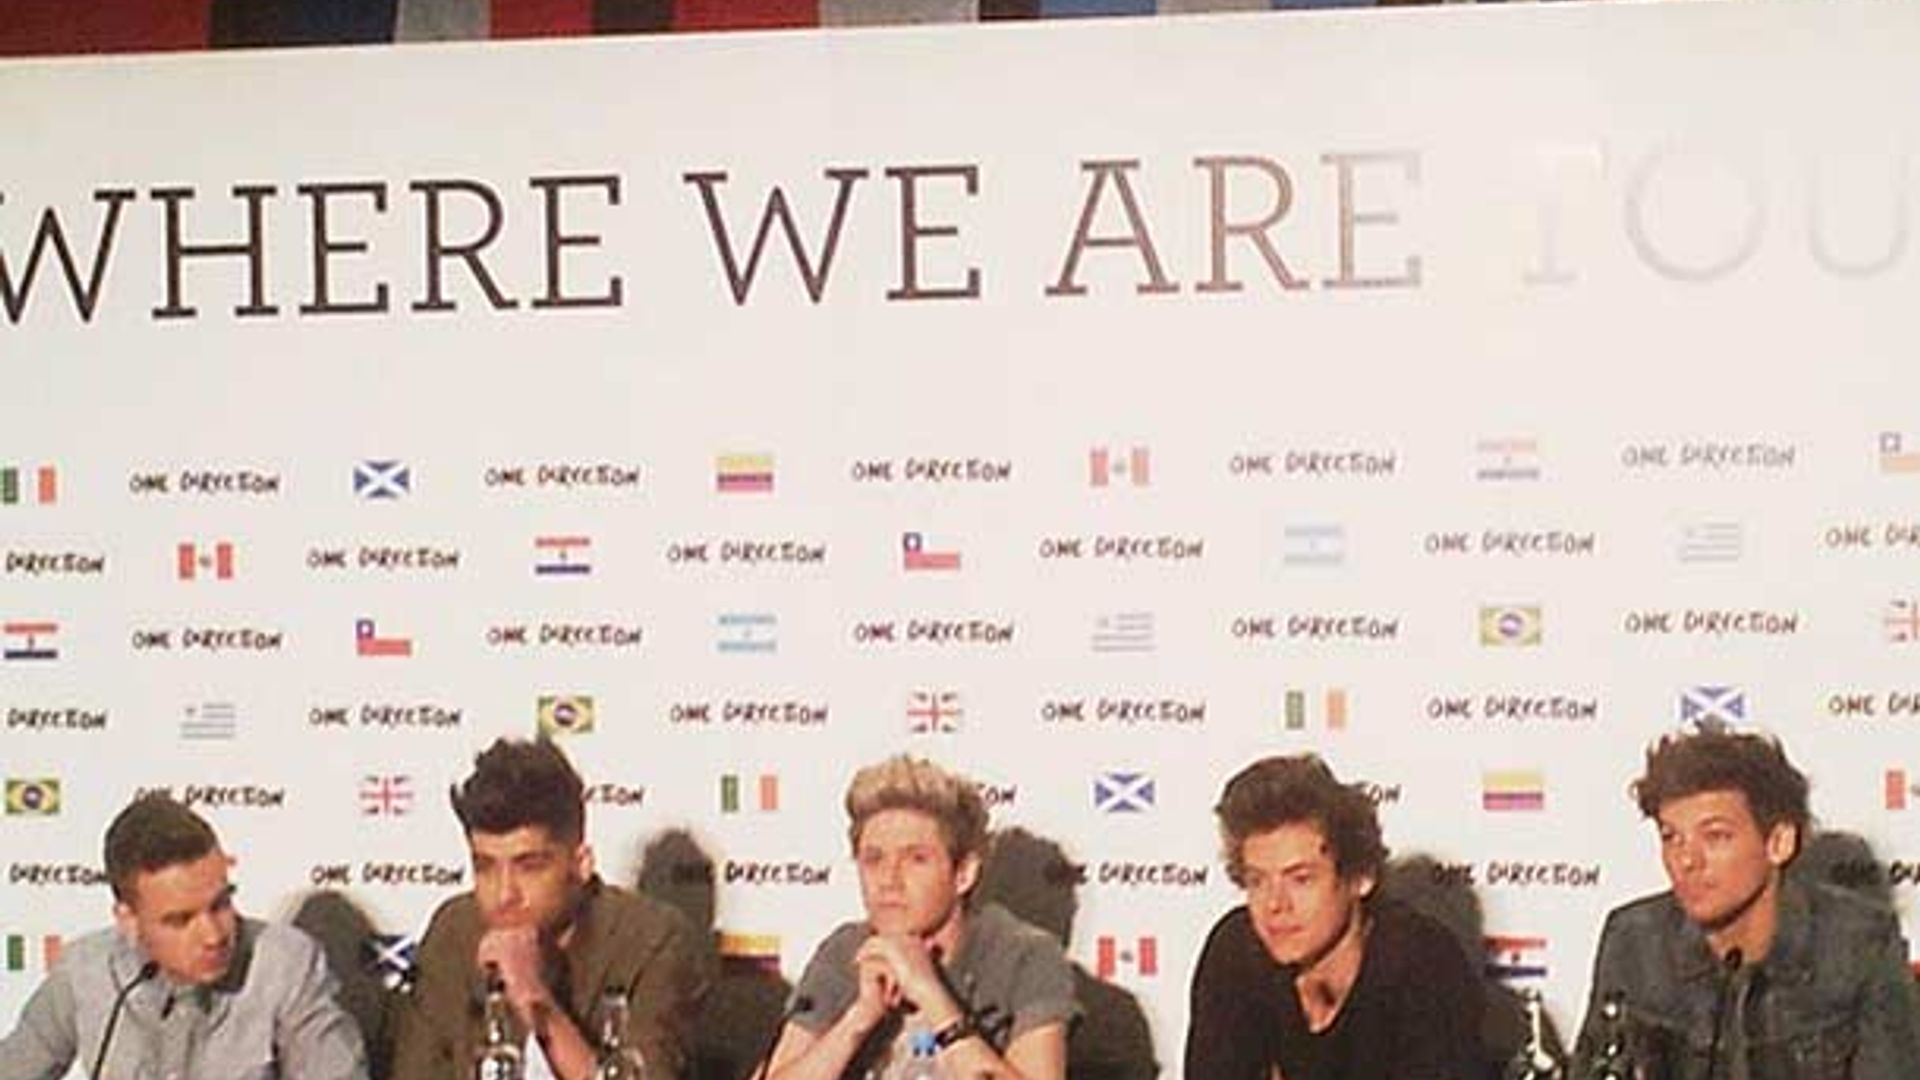 One Direction announce 2014 world tour